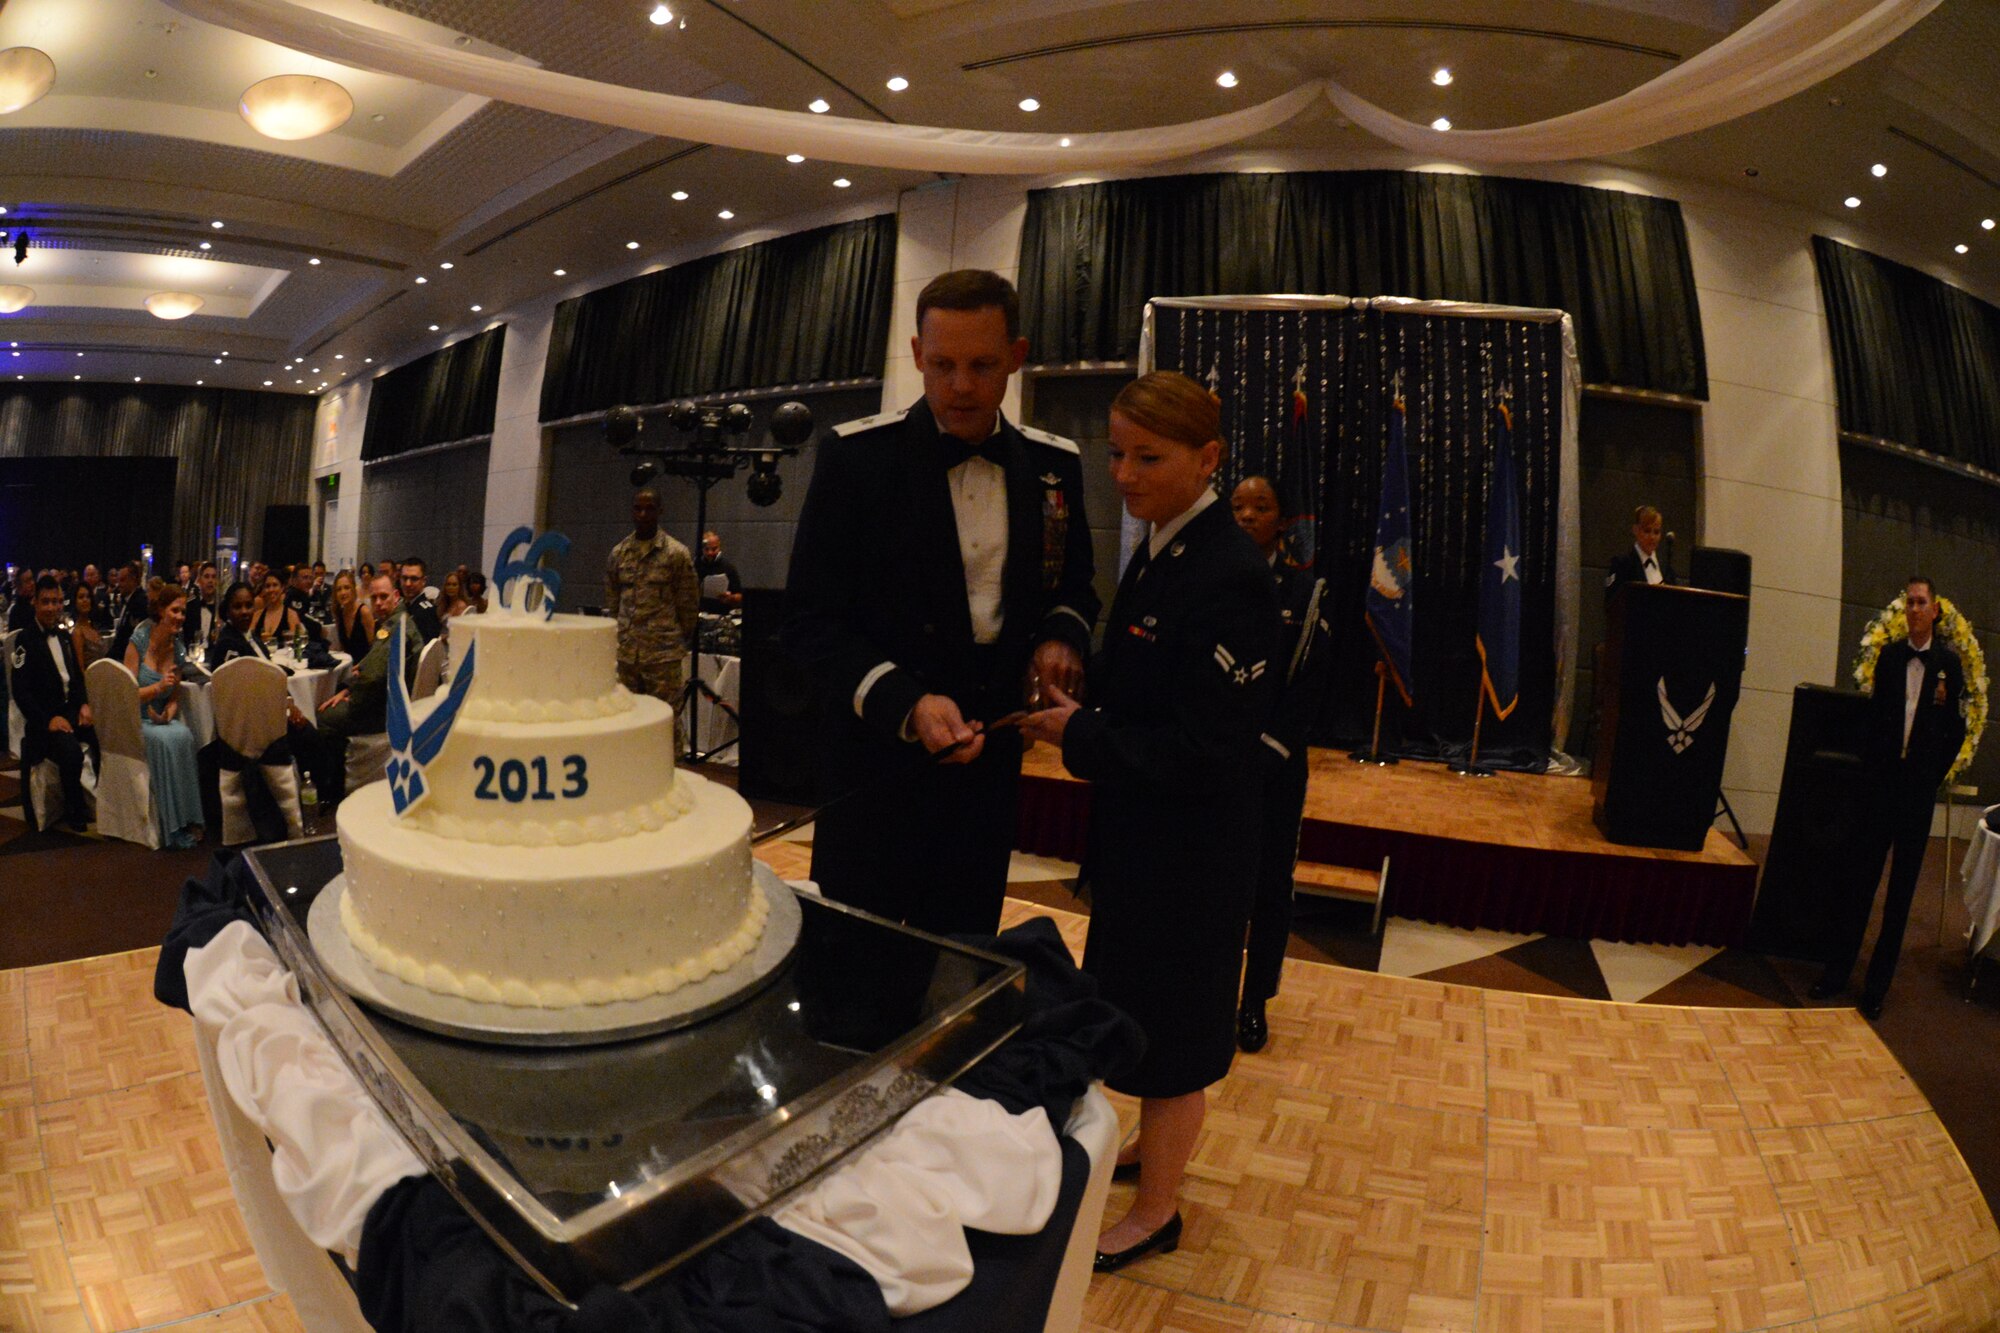 Brig. Gen.  Steven Garland, 36th Wing commander, and Airman 1st Class Miranda Woodruff, 734th Air Mobility Squadron passenger service agent, cut the Air Force birthday cake at the 66th Annual Air Force Ball Sept. 20, 2013, at Leo Palace in Yona, Guam. The cake is traditionally cut together by the Airman with the most time-in-service, and the Airman with the least time-in-service attending the event. (U.S. Air Force Photo by Airman 1st Class Emily A. Bradley/Released)